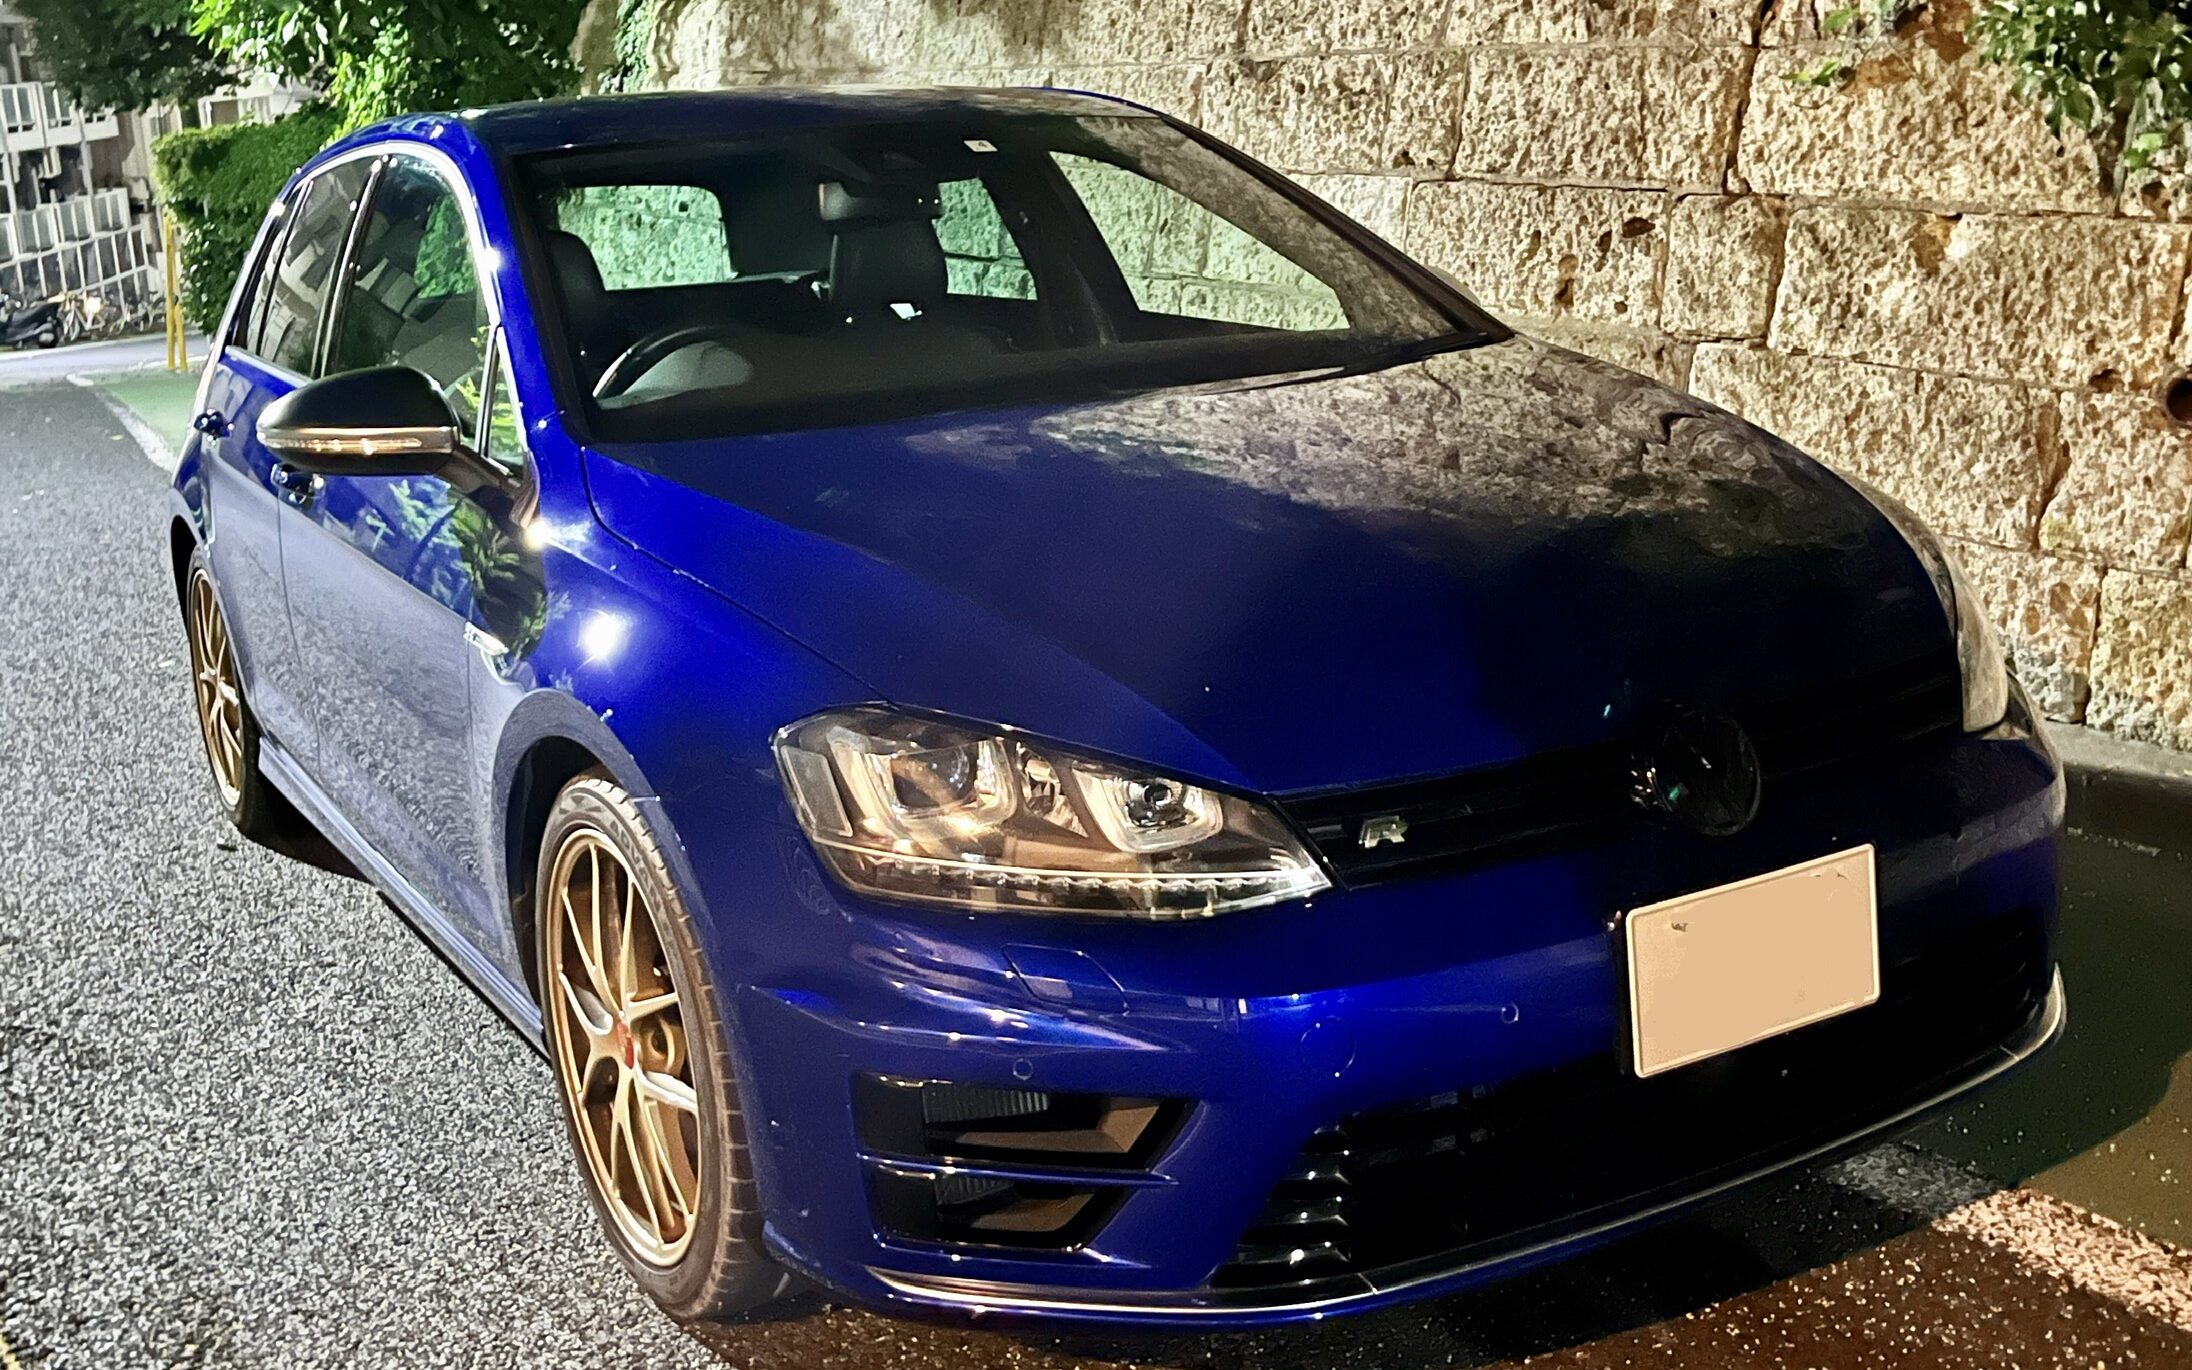 VW Golf R Afterfire and bubbling installation